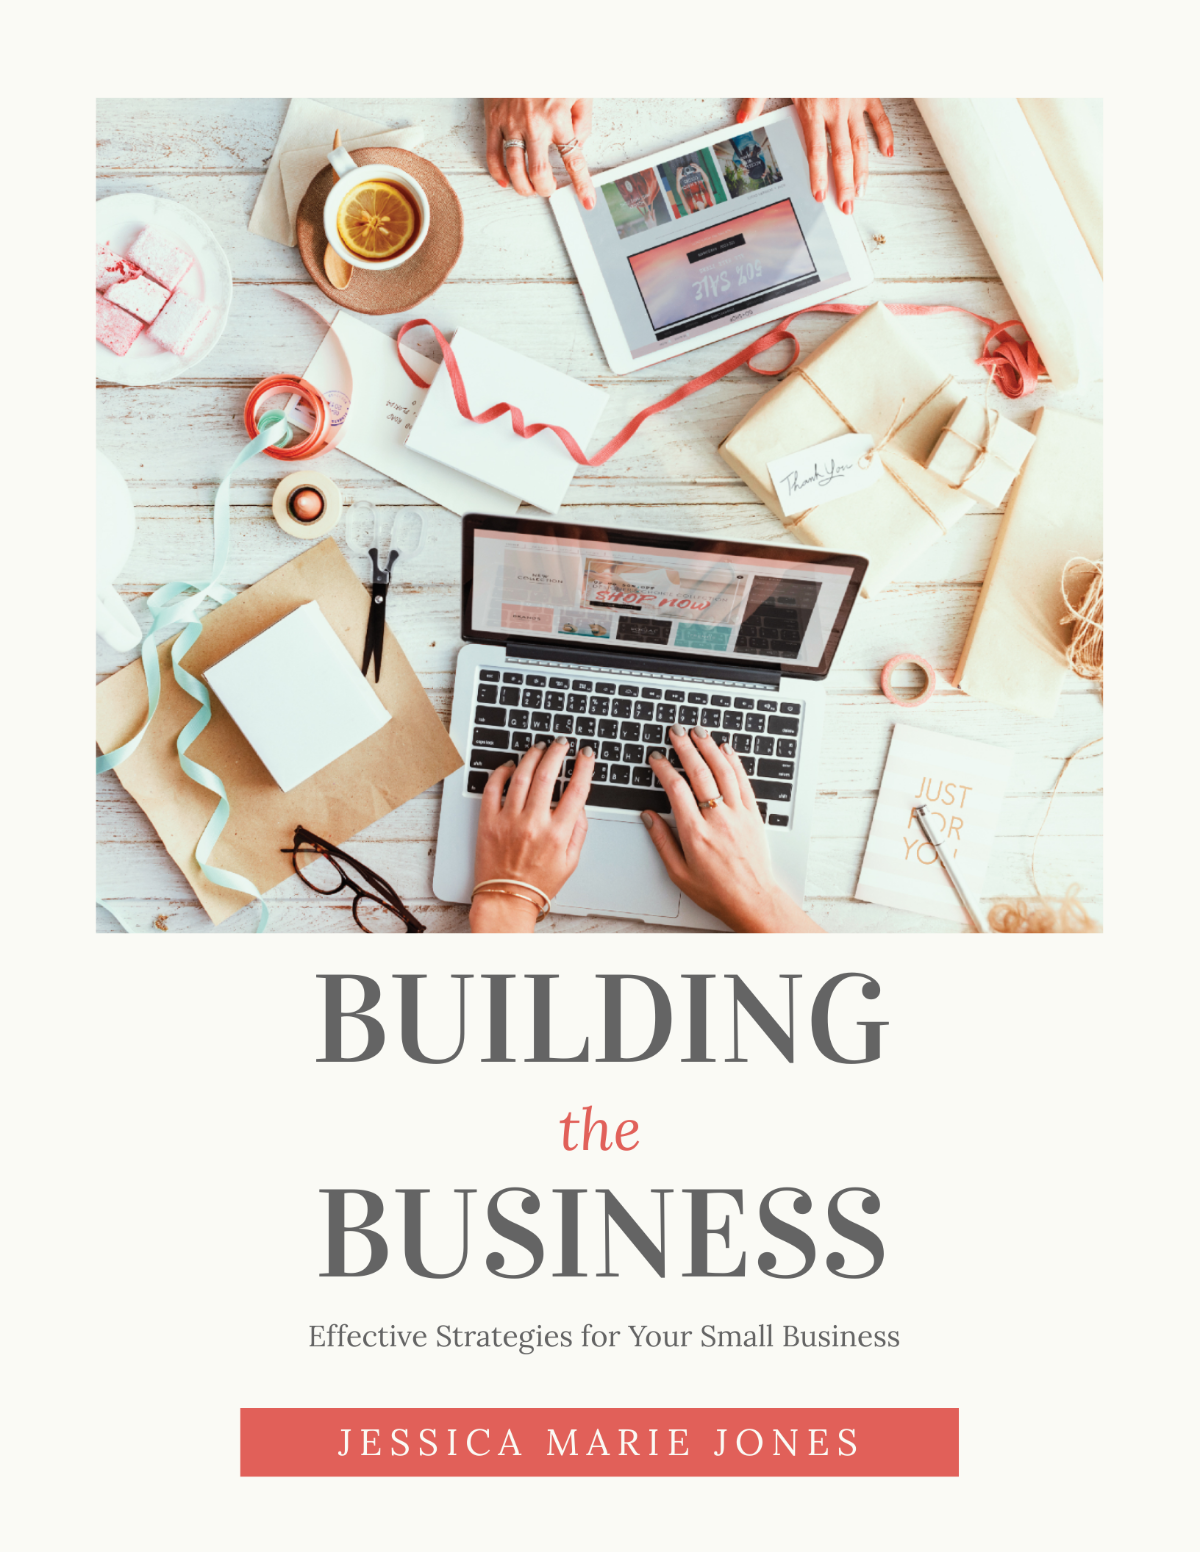 Small Business Book Cover Template